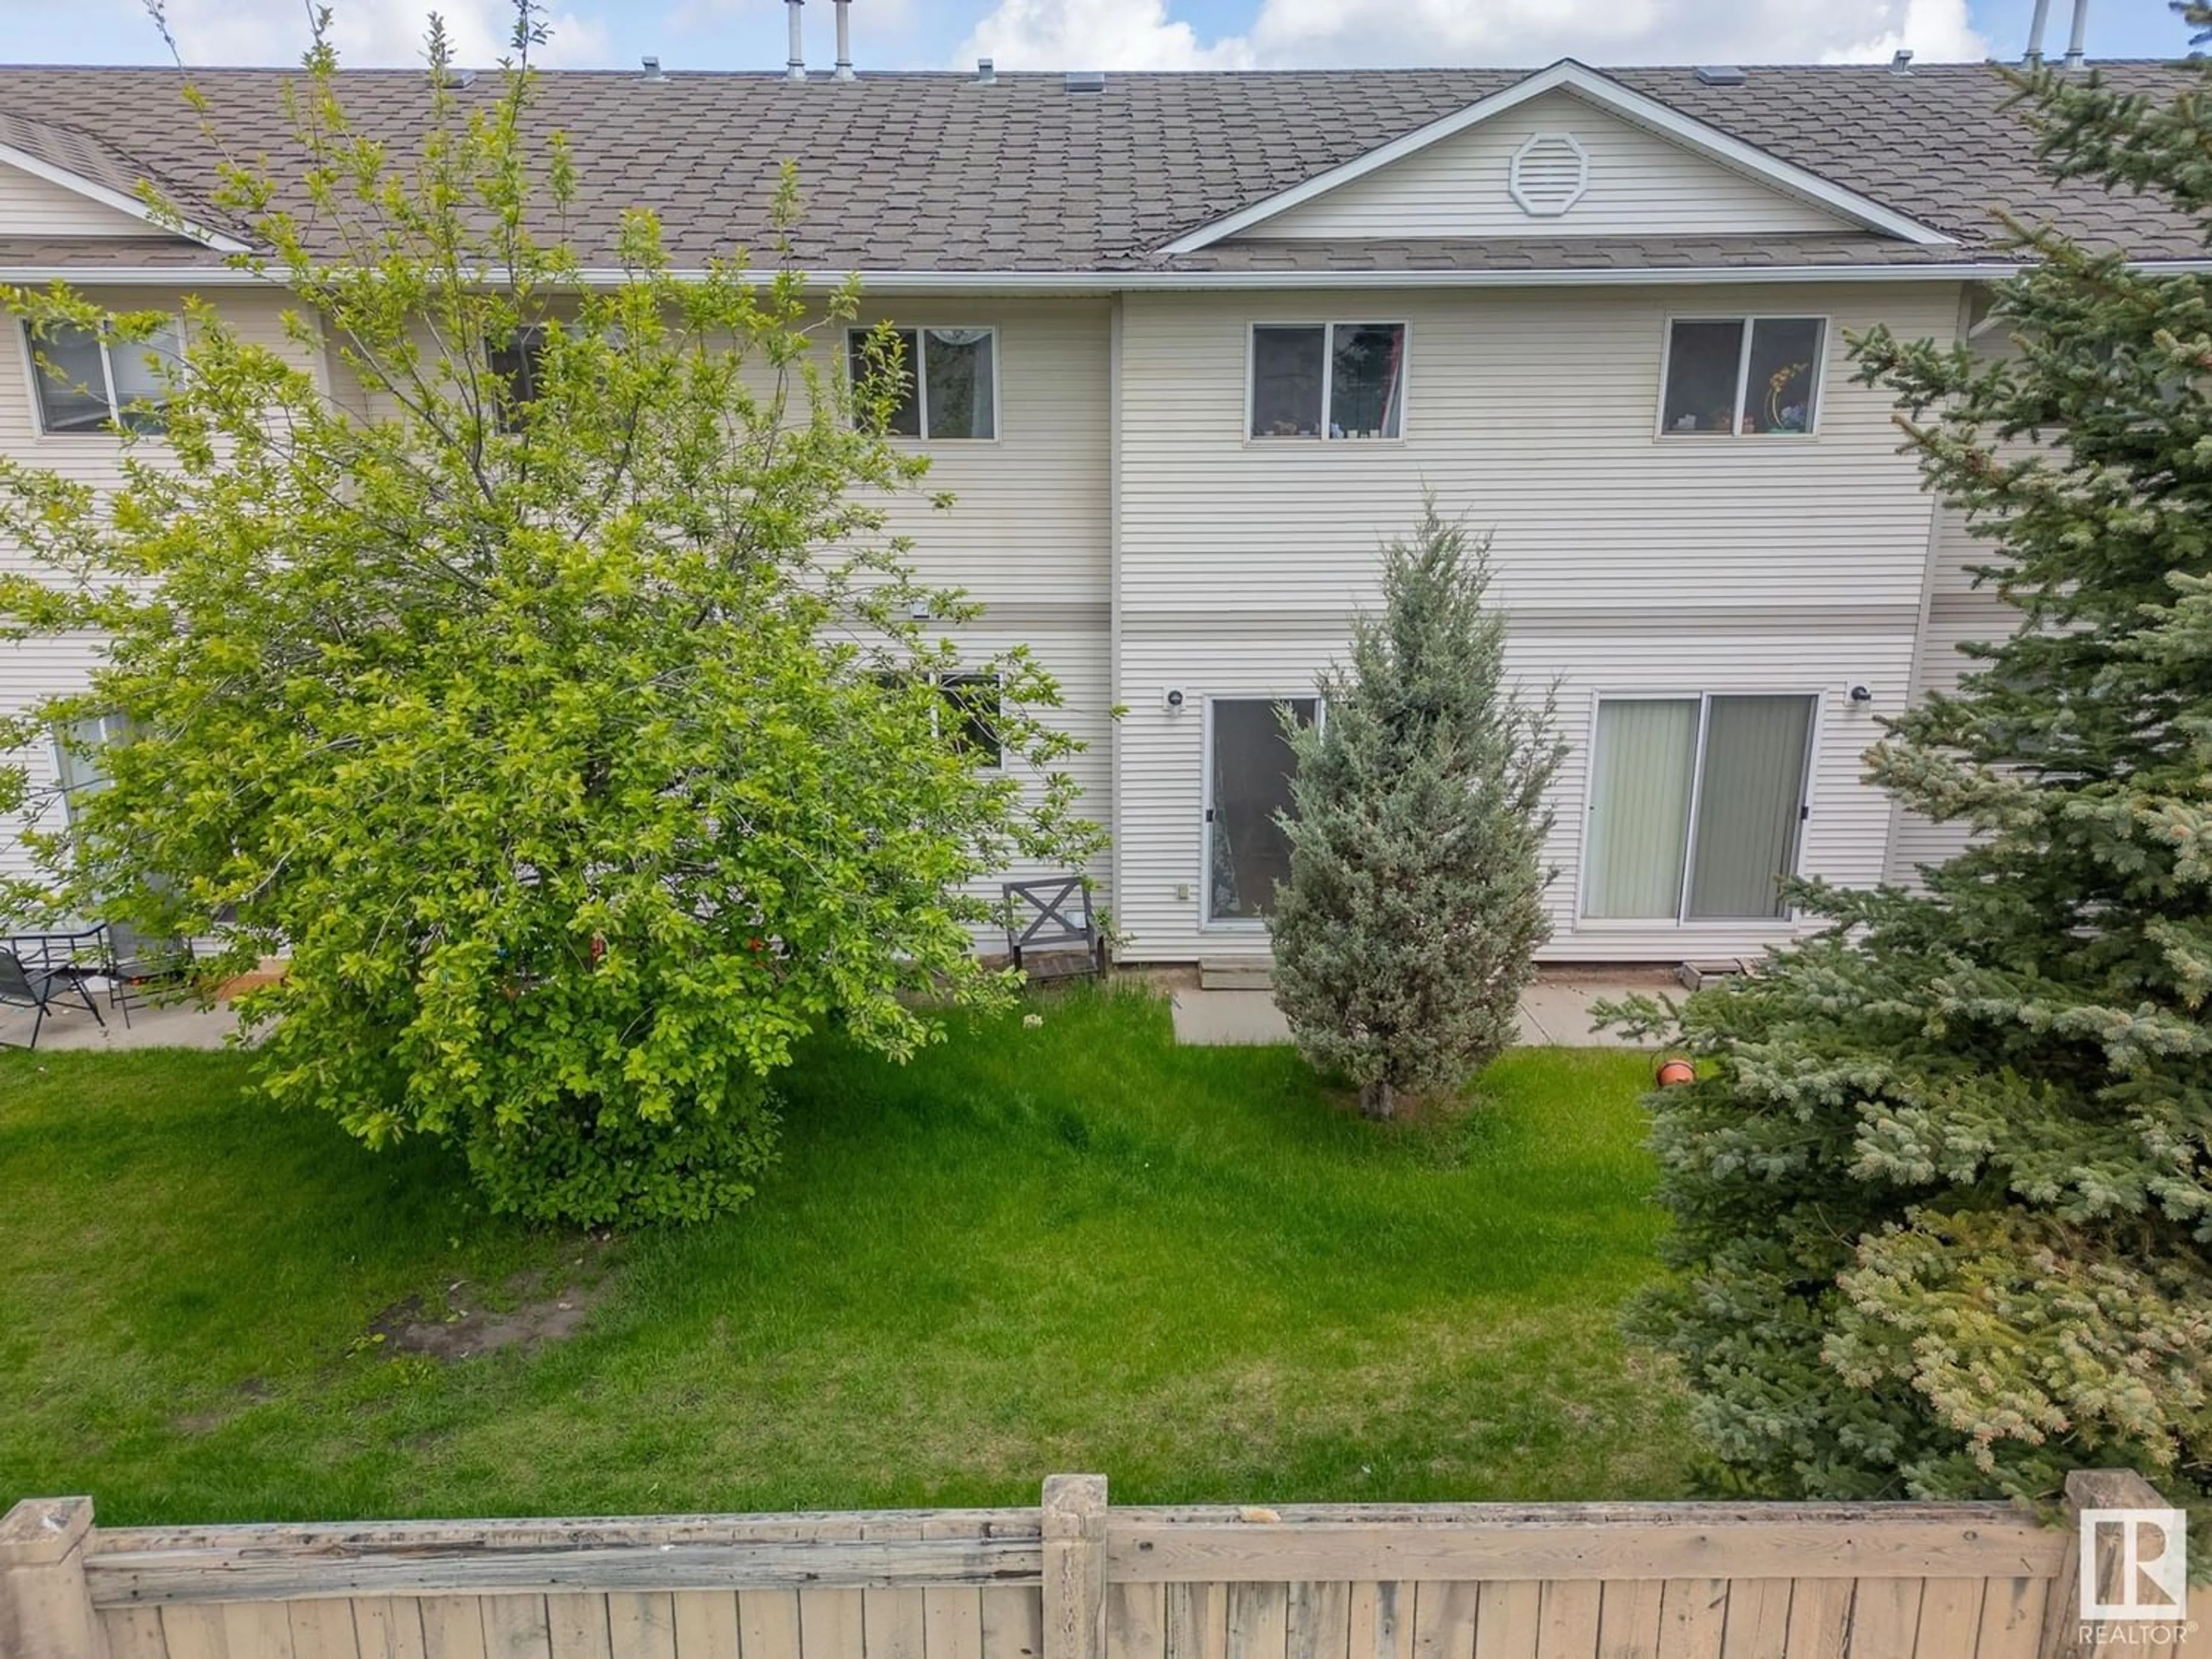 A pic from exterior of the house or condo for #204 801 BOTHWELL DR, Sherwood Park Alberta T8H2L1